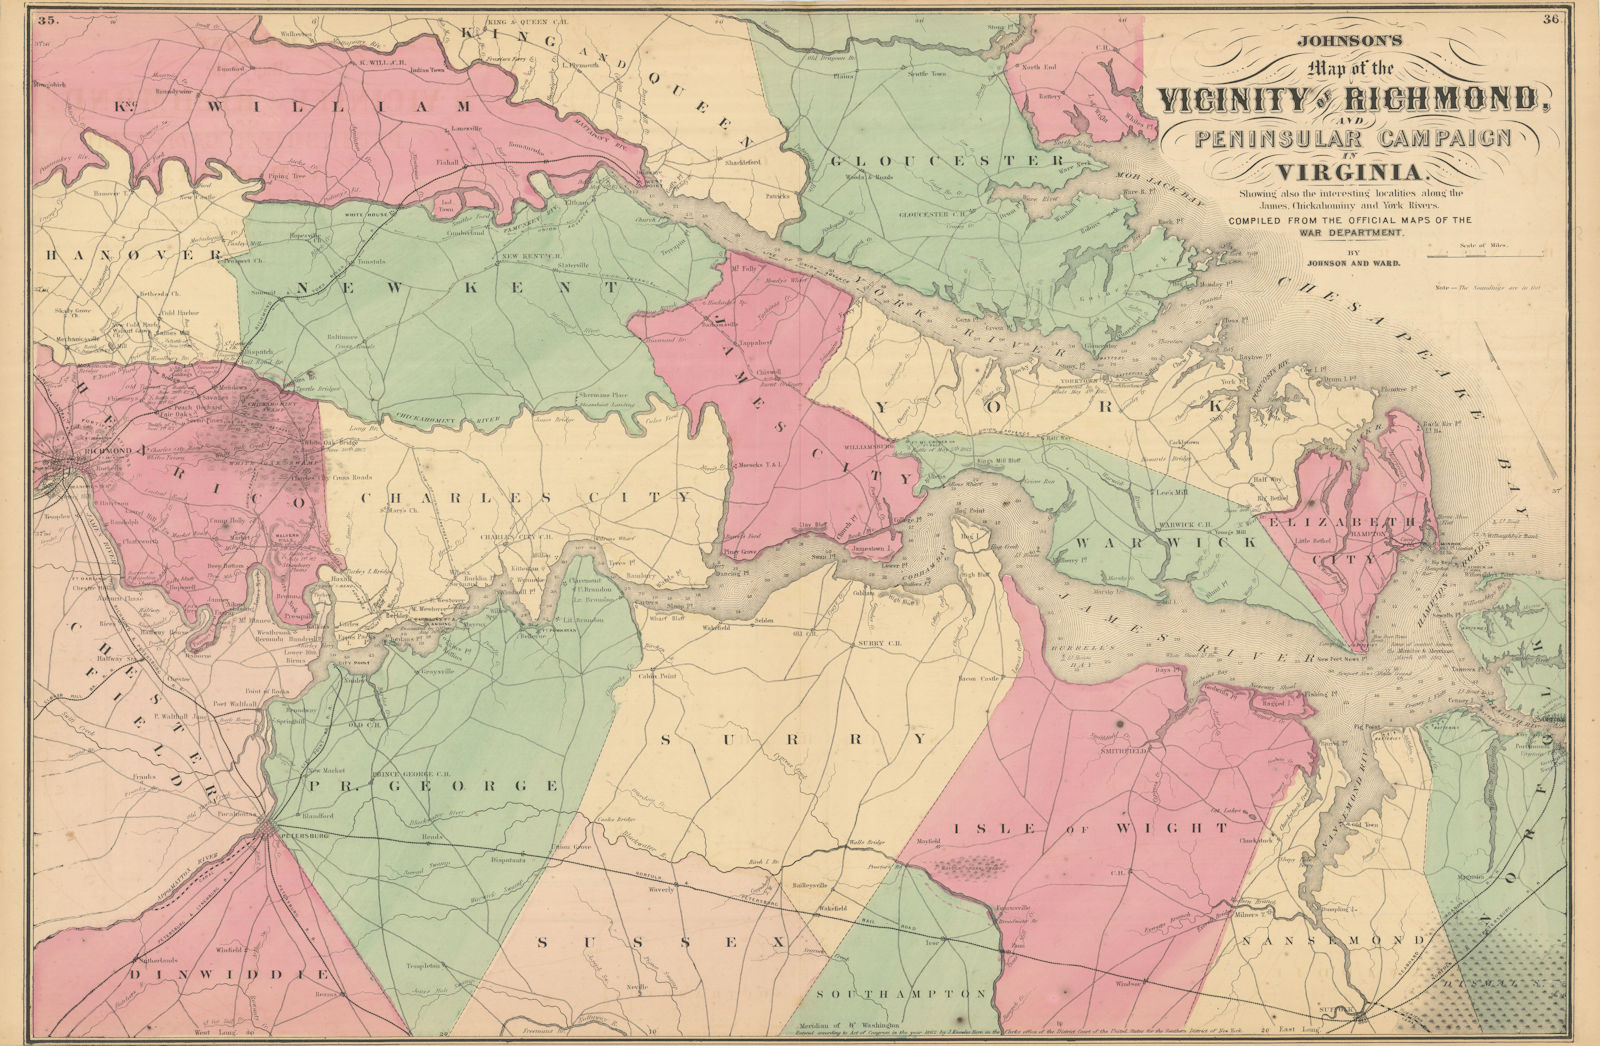 Vicinity of Richmond & Peninsular Campaign in Virginia. JOHNSON 1866 old map